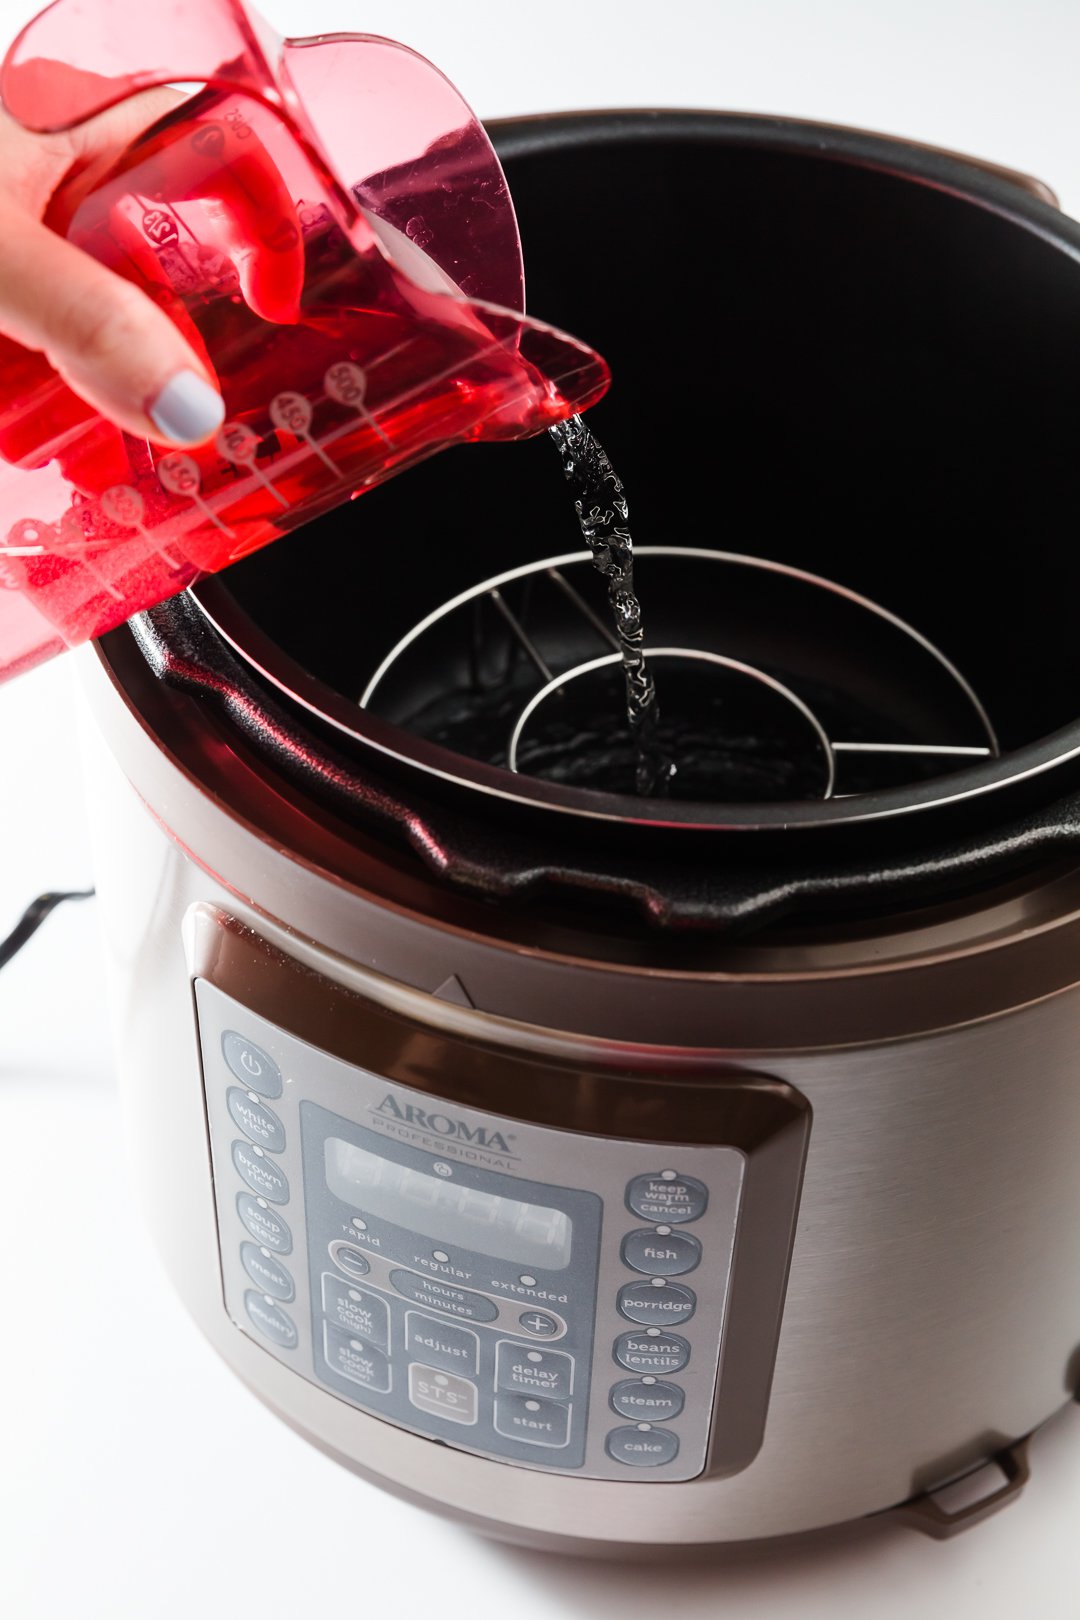 Adding water to a pressure cooker